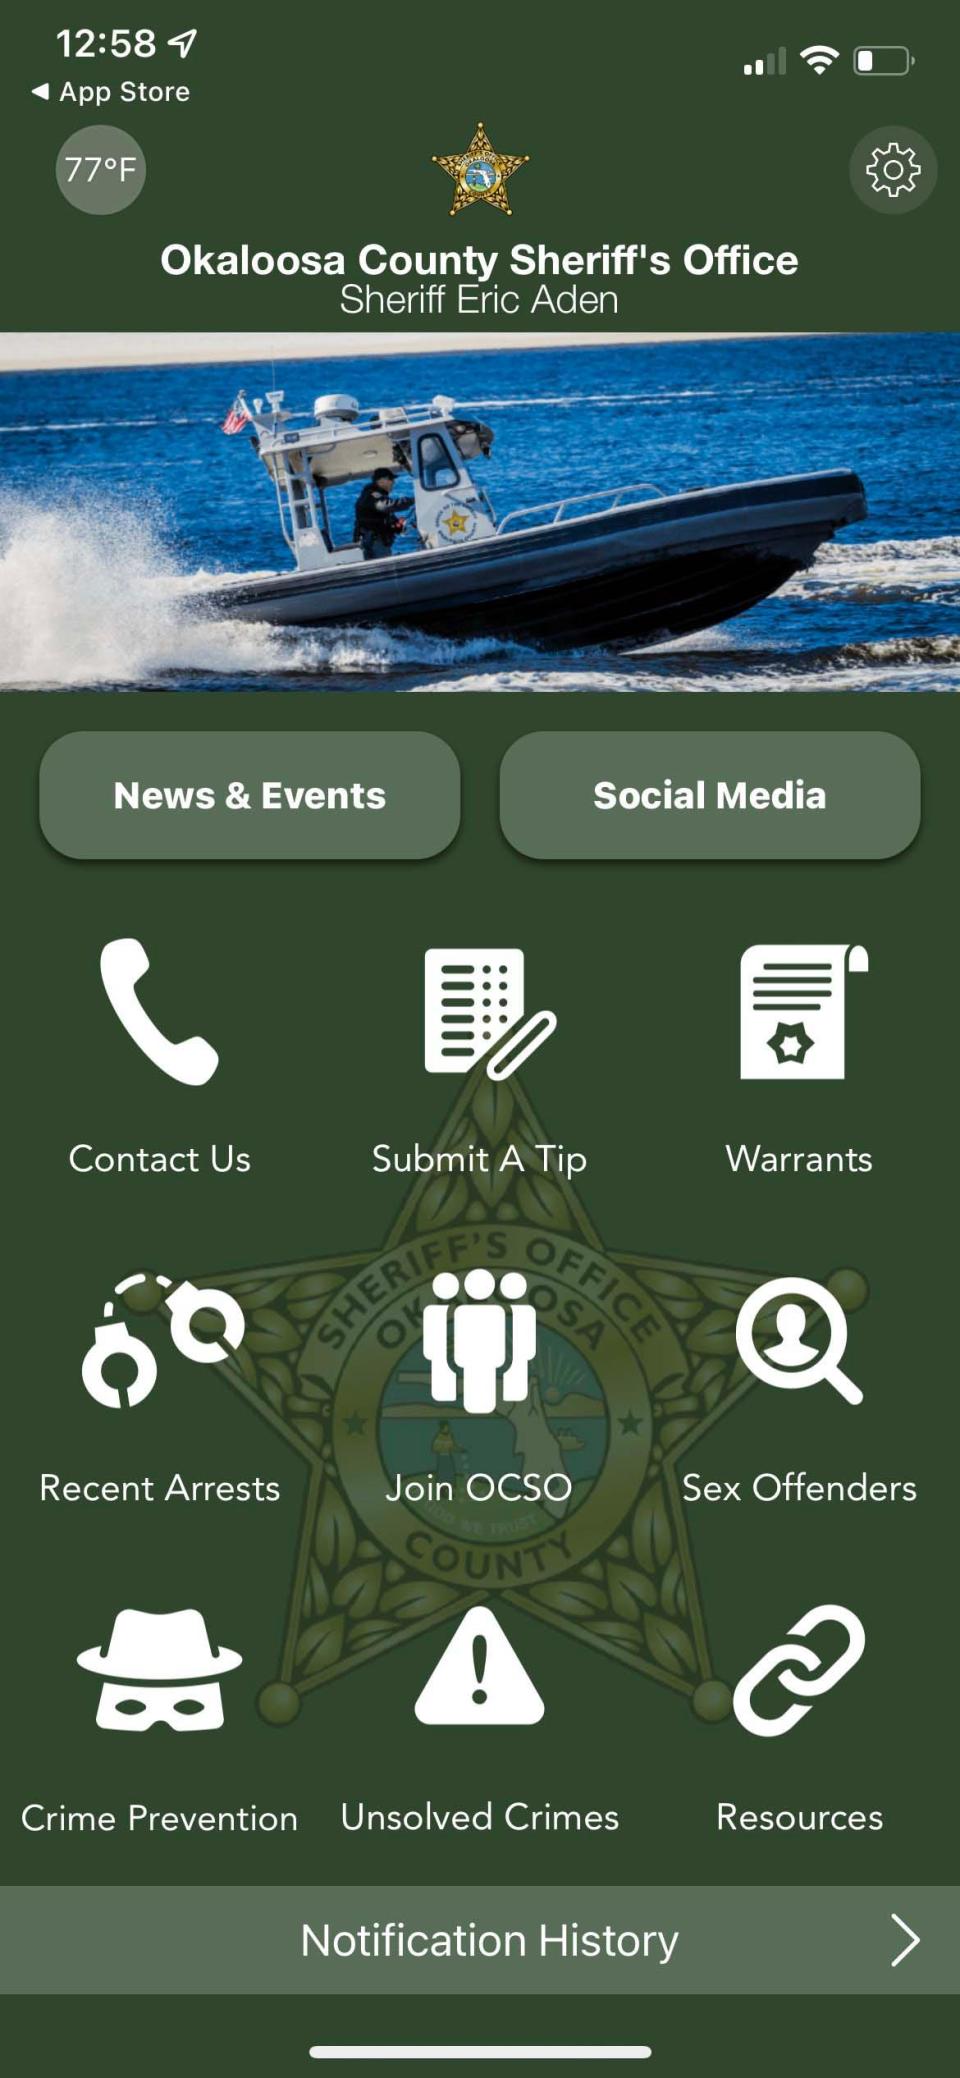 The new Aqua Alert will notify people in Okaloosa County of missing boaters in the hope that they will be able to assist authorities in locating them. The notification will go out through the Okaloosa County Sheriff's Office app, a free program available at Apple's App store and Google Play.